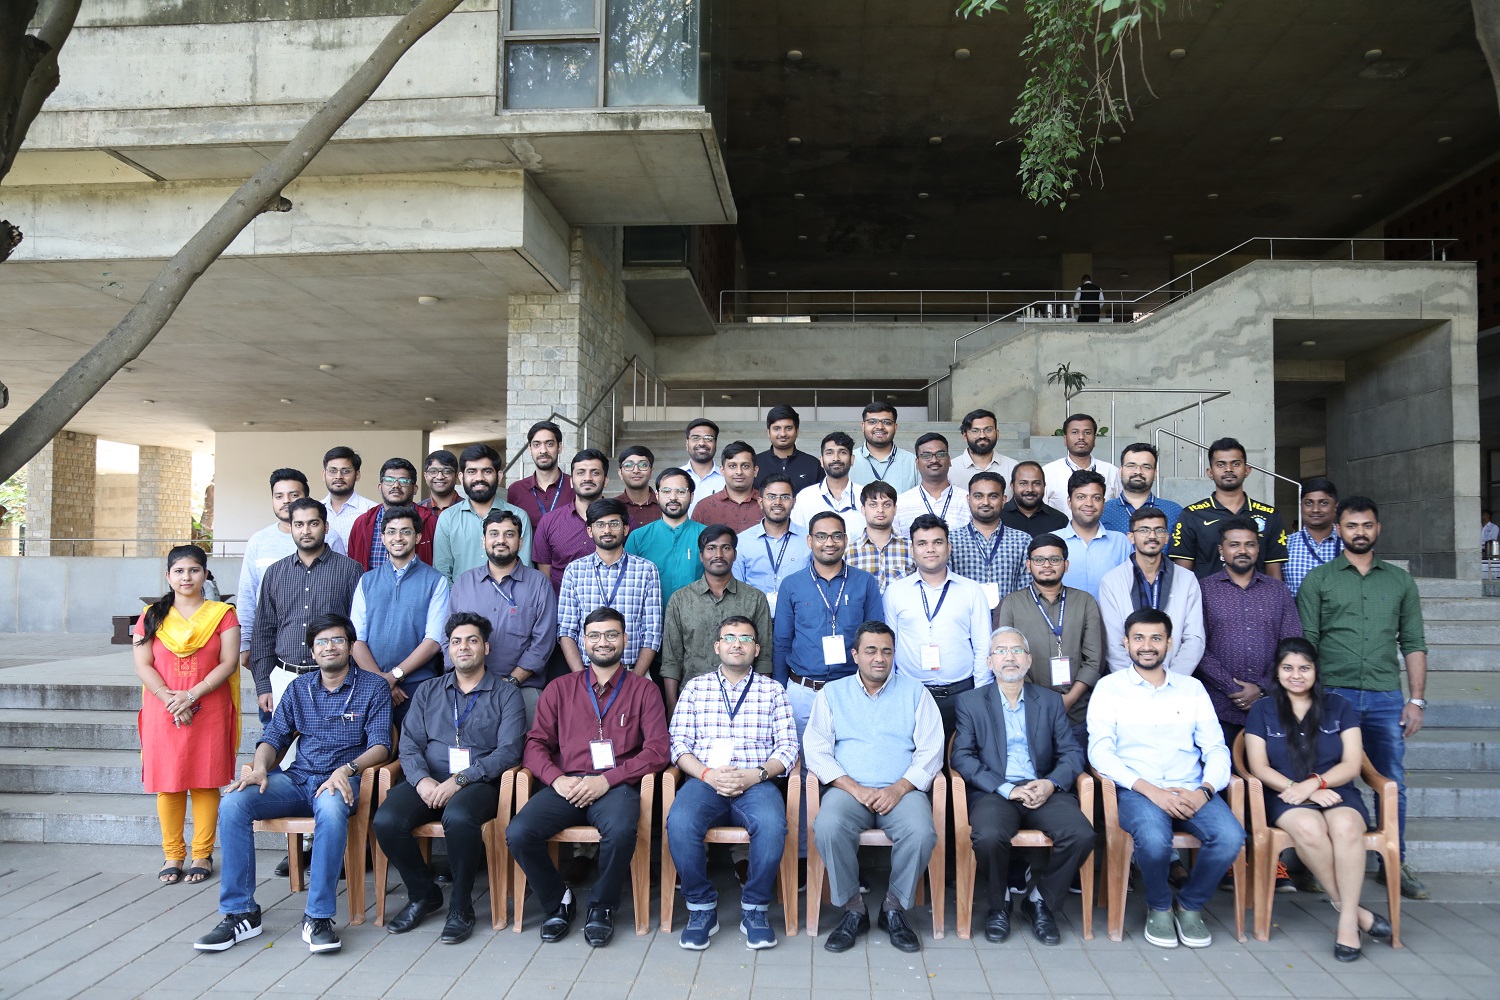 Participants of the EGMPx for Reliance Industries FLYER 03 programme, on 12 January 2023.